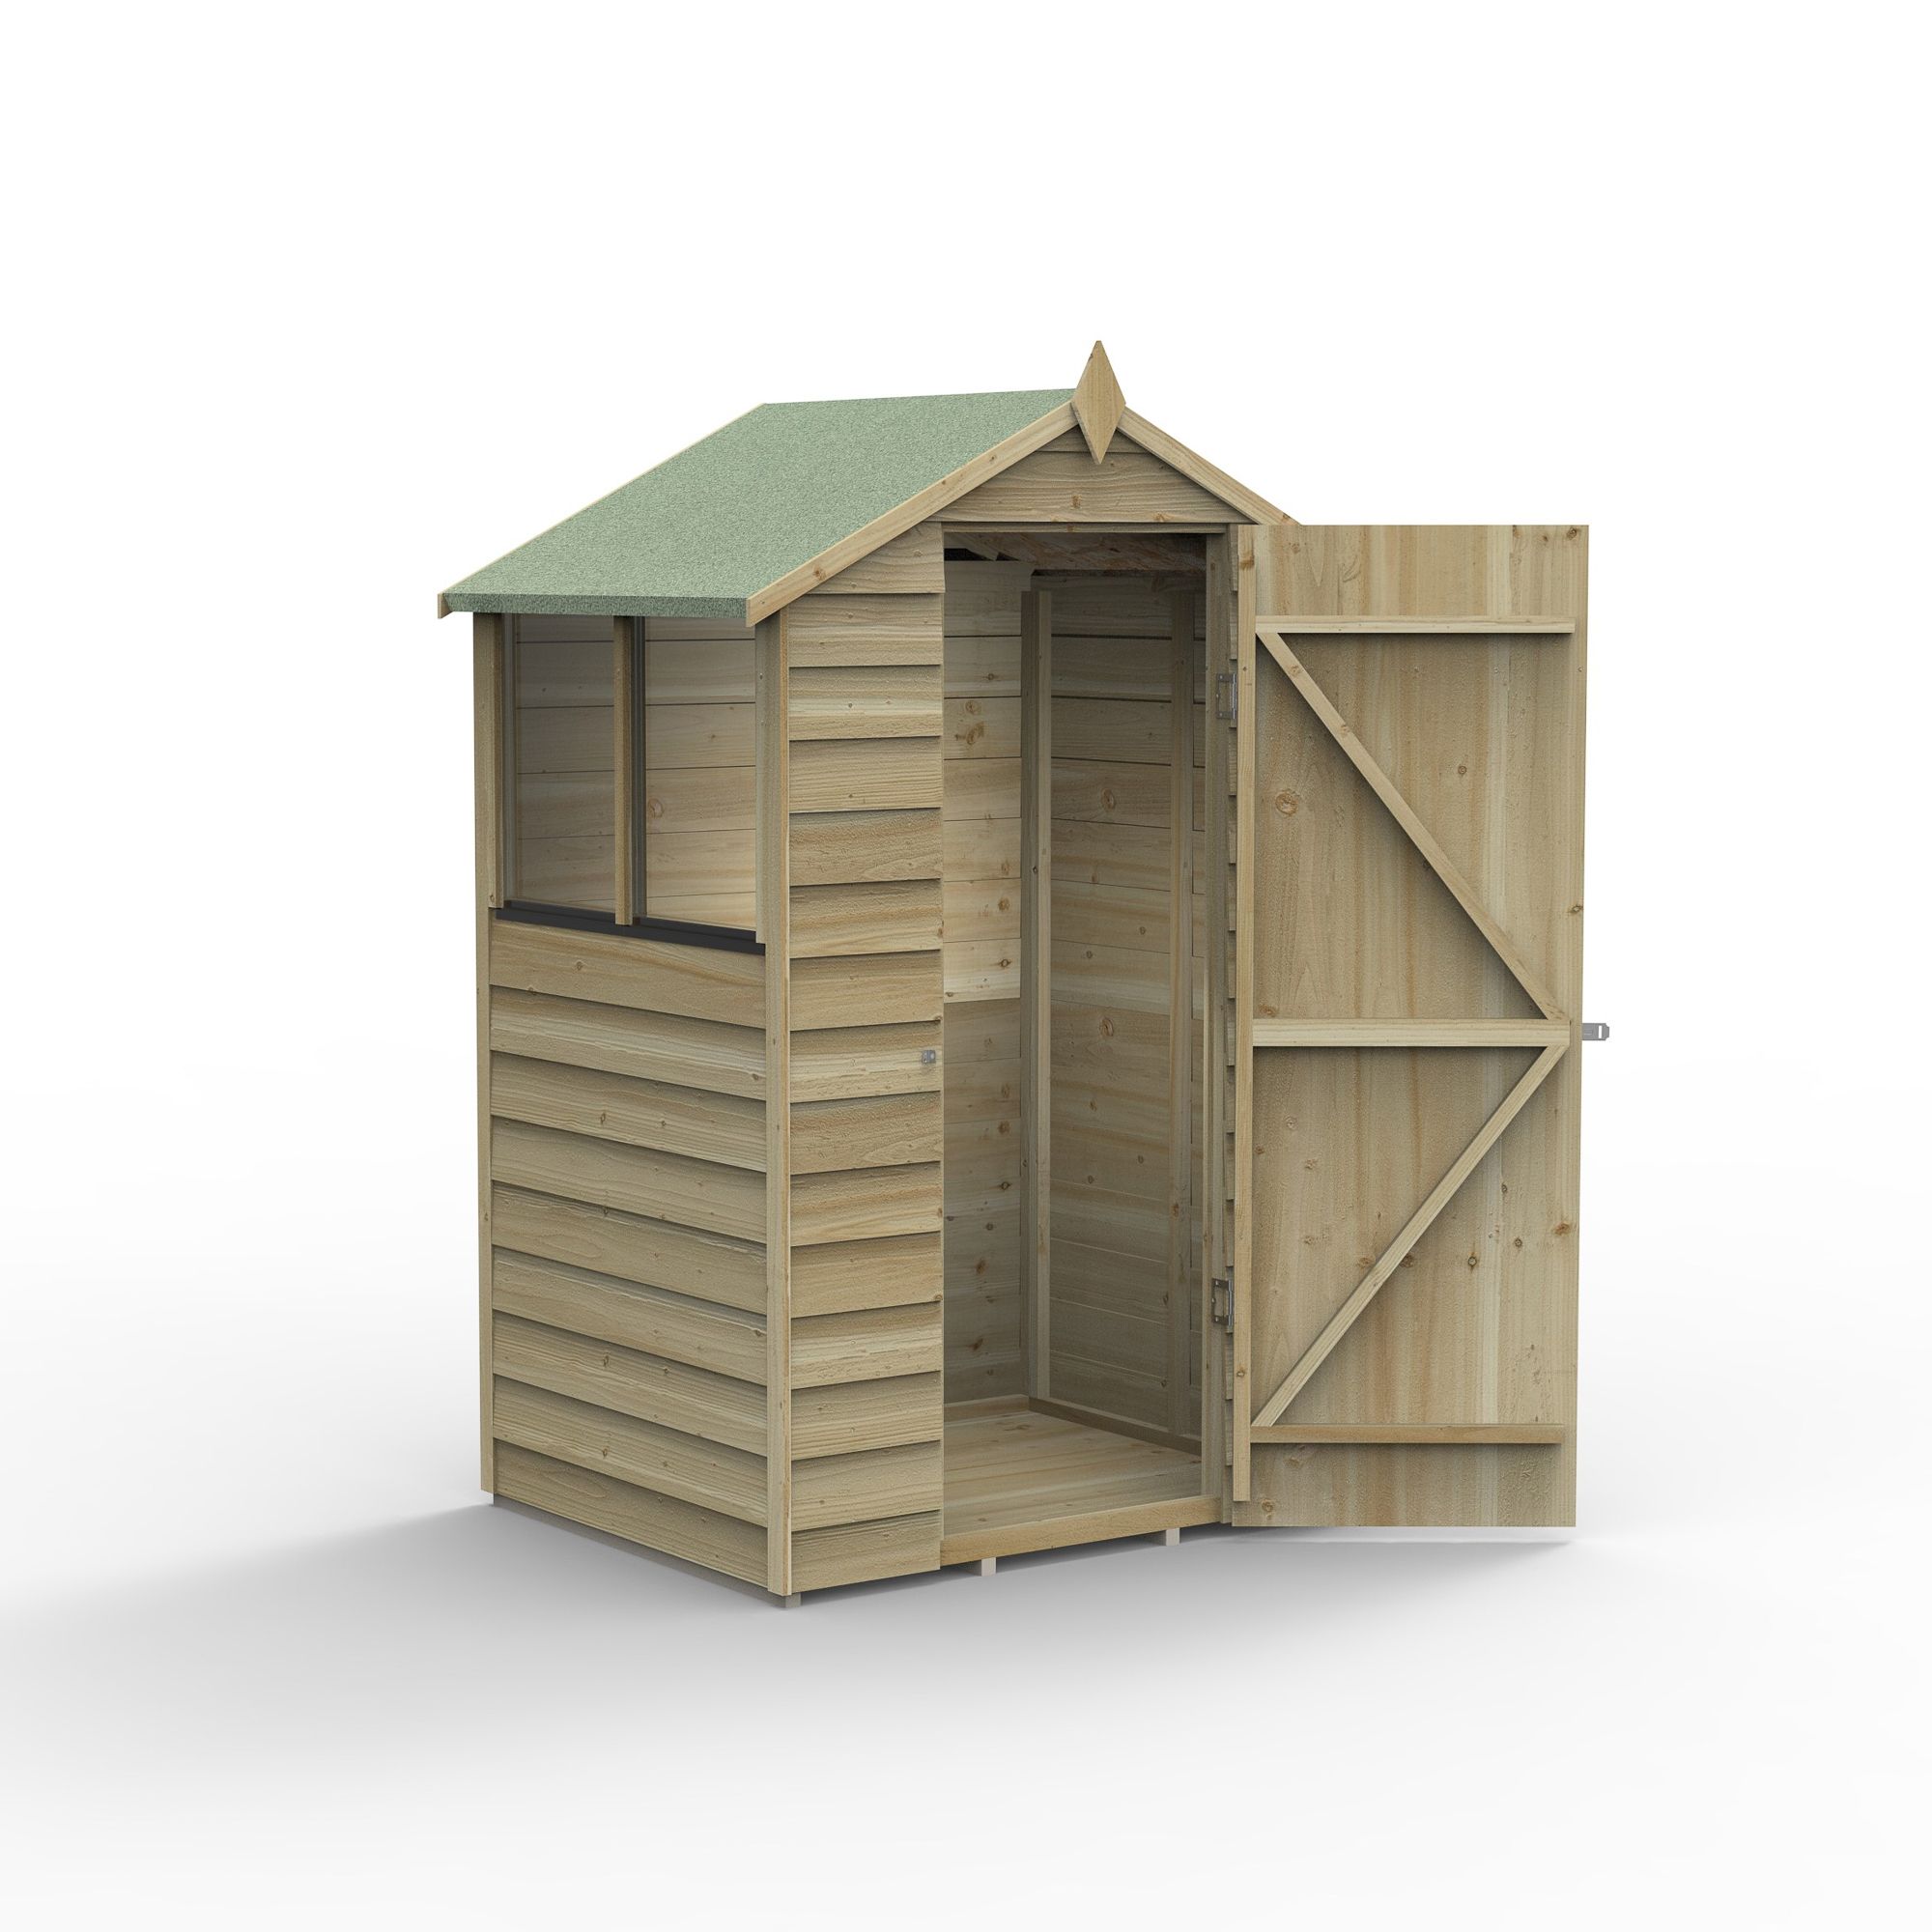 Forest Garden Overlap 4x3 ft Apex Wooden Shed with floor & 2 windows (Base included) - Assembly service included